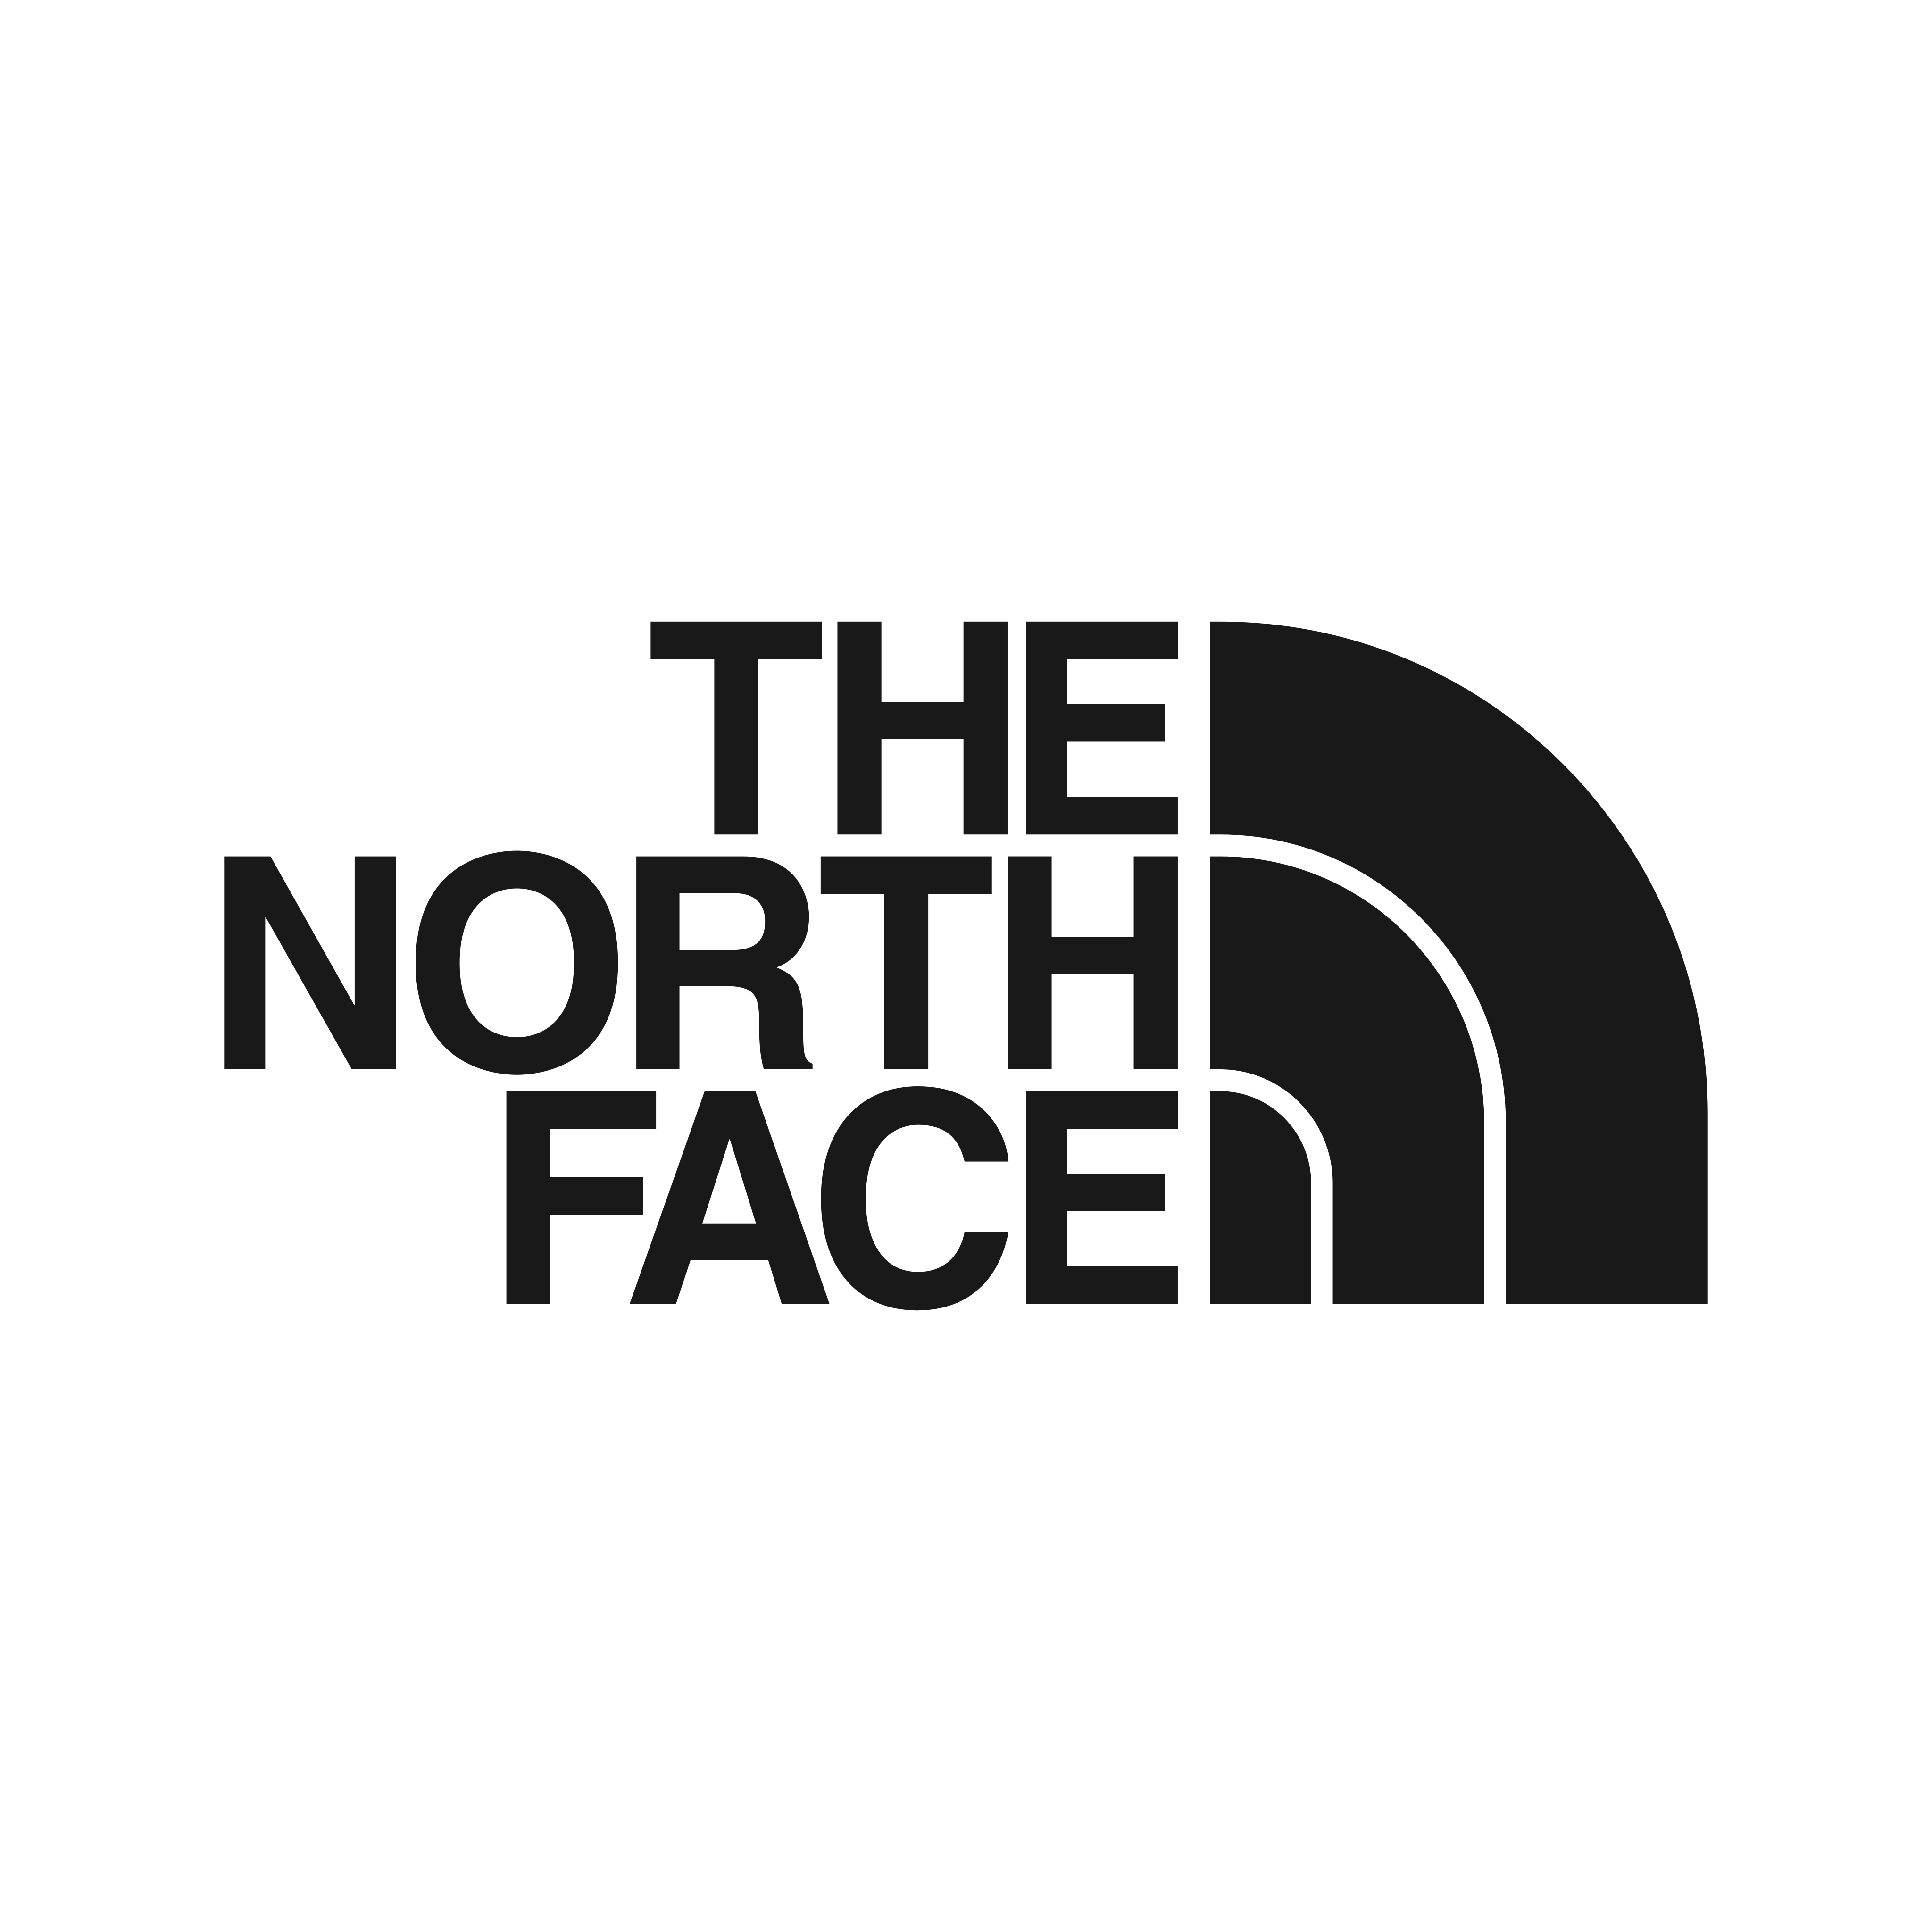 The North Face Logo PNG.